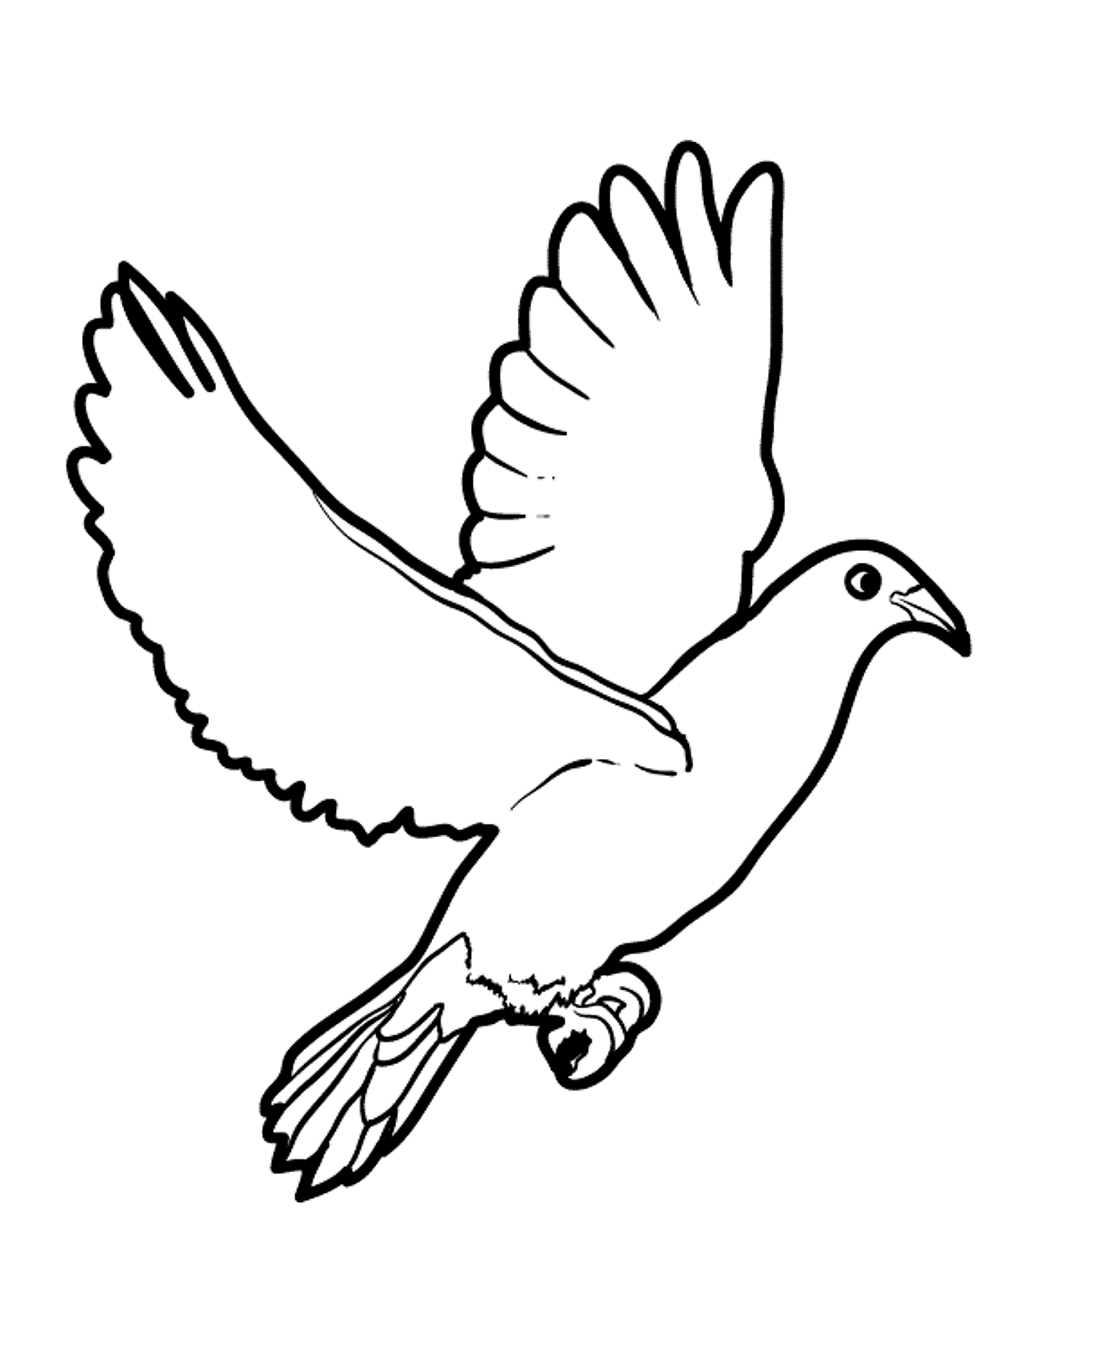 colouring picture bird flying canary bird coloring pages best place to color colouring picture bird 